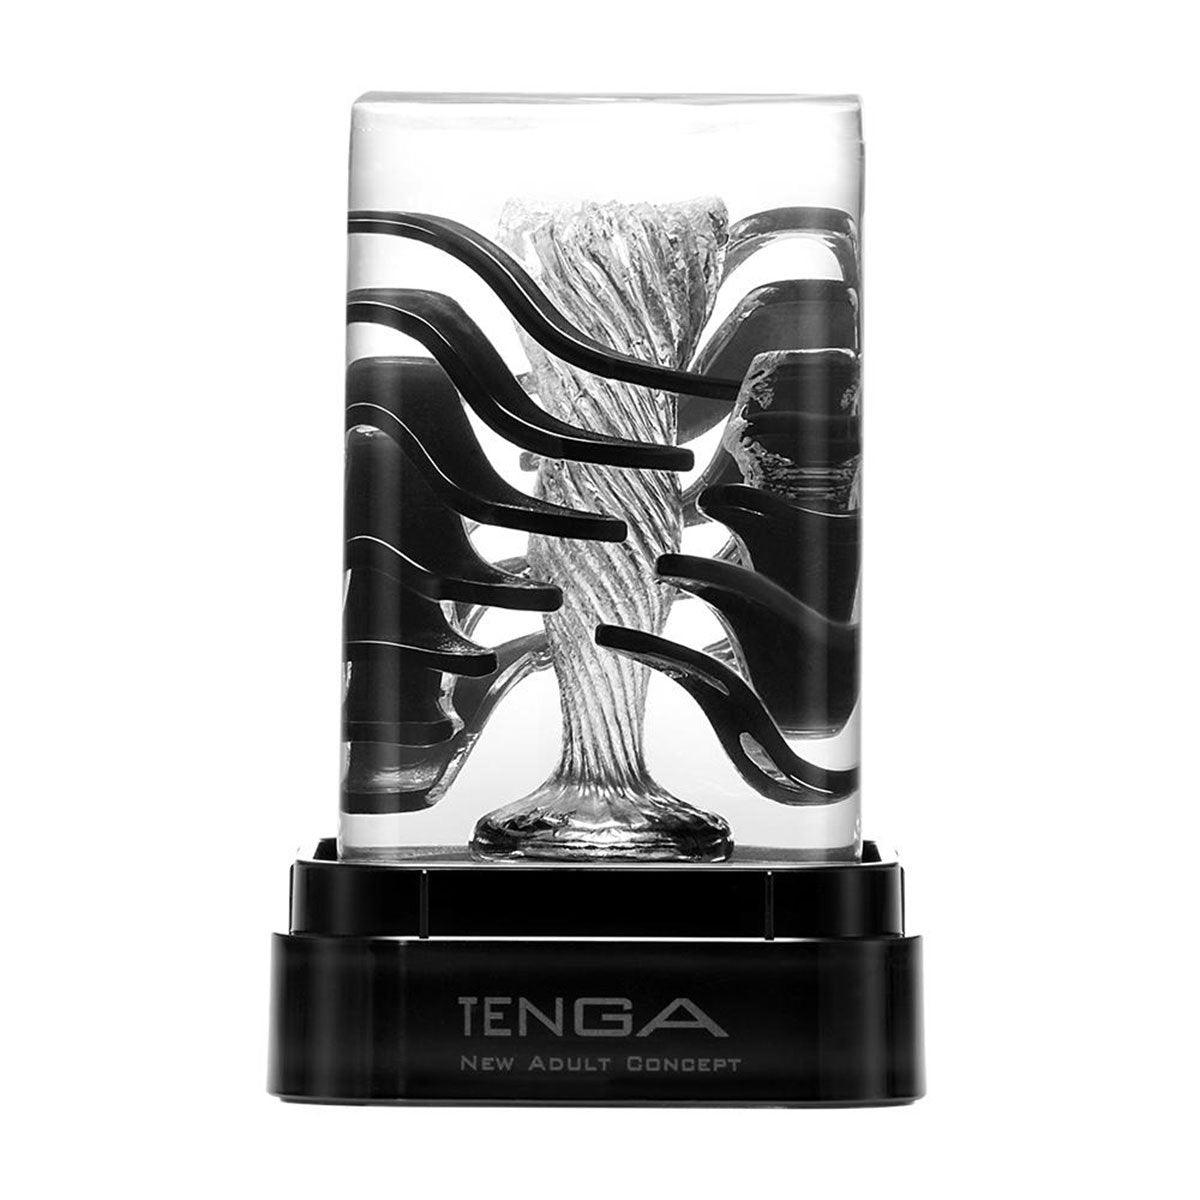 Tenga Crysta Leaf - Buy At Luxury Toy X - Free 3-Day Shipping